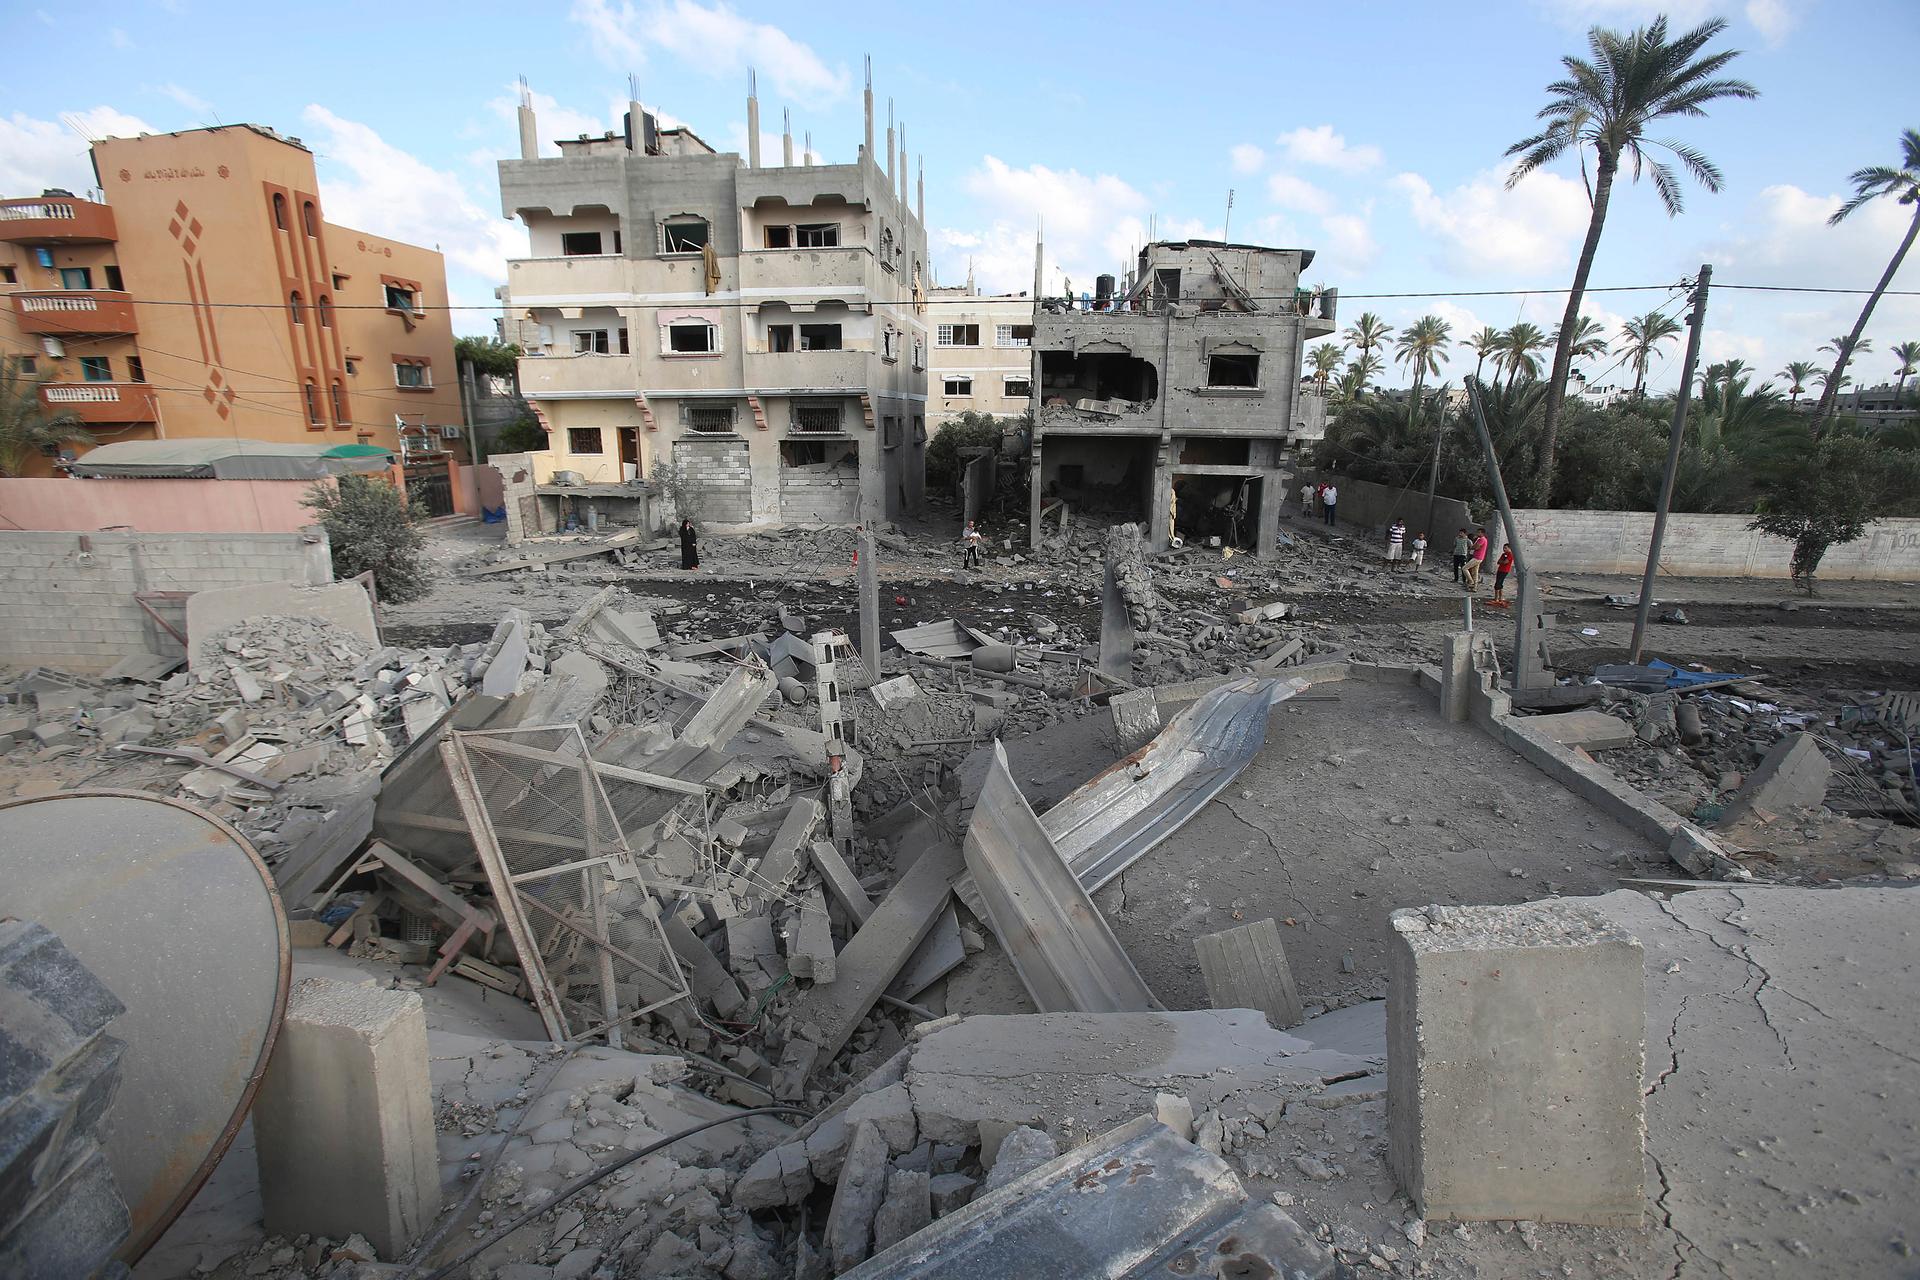 Palestinians look at the rubble of a house which police said was destroyed in an Israeli air strike in Deir El-Balah in the central Gaza Strip July 14, 2014.